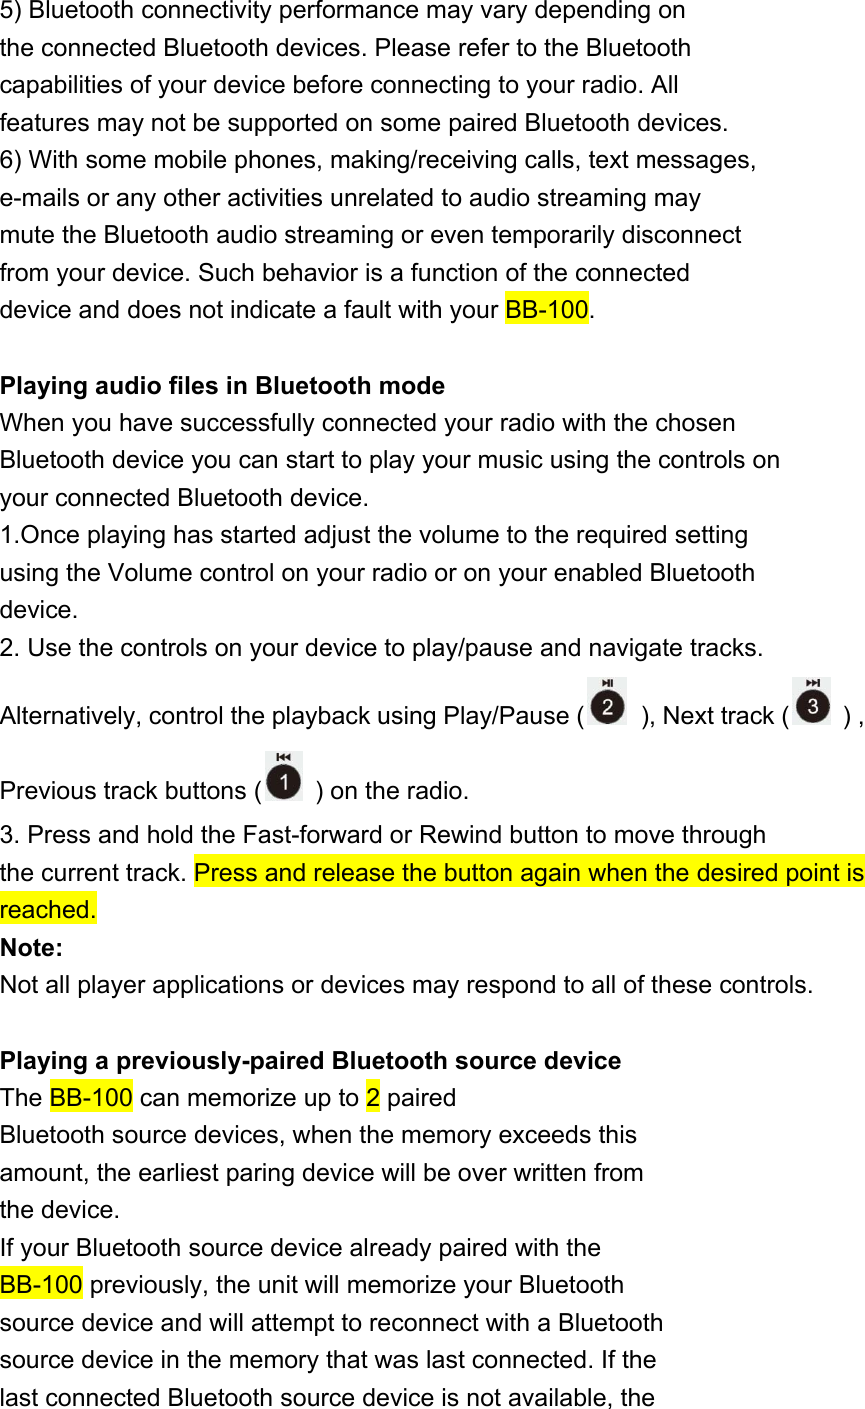 5) Bluetooth connectivity performance may vary depending on the connected Bluetooth devices. Please refer to the Bluetooth capabilities of your device before connecting to your radio. All features may not be supported on some paired Bluetooth devices. 6) With some mobile phones, making/receiving calls, text messages, e-mails or any other activities unrelated to audio streaming may mute the Bluetooth audio streaming or even temporarily disconnect from your device. Such behavior is a function of the connected device and does not indicate a fault with your BB-100.  Playing audio files in Bluetooth mode When you have successfully connected your radio with the chosen Bluetooth device you can start to play your music using the controls on your connected Bluetooth device. 1.Once playing has started adjust the volume to the required setting using the Volume control on your radio or on your enabled Bluetooth device. 2. Use the controls on your device to play/pause and navigate tracks. Alternatively, control the playback using Play/Pause (   ), Next track (   ) , Previous track buttons (   ) on the radio. 3. Press and hold the Fast-forward or Rewind button to move through the current track. Press and release the button again when the desired point is reached. Note: Not all player applications or devices may respond to all of these controls.  Playing a previously-paired Bluetooth source device The BB-100 can memorize up to 2 paired Bluetooth source devices, when the memory exceeds this amount, the earliest paring device will be over written from the device. If your Bluetooth source device already paired with the BB-100 previously, the unit will memorize your Bluetooth source device and will attempt to reconnect with a Bluetooth source device in the memory that was last connected. If the last connected Bluetooth source device is not available, the 